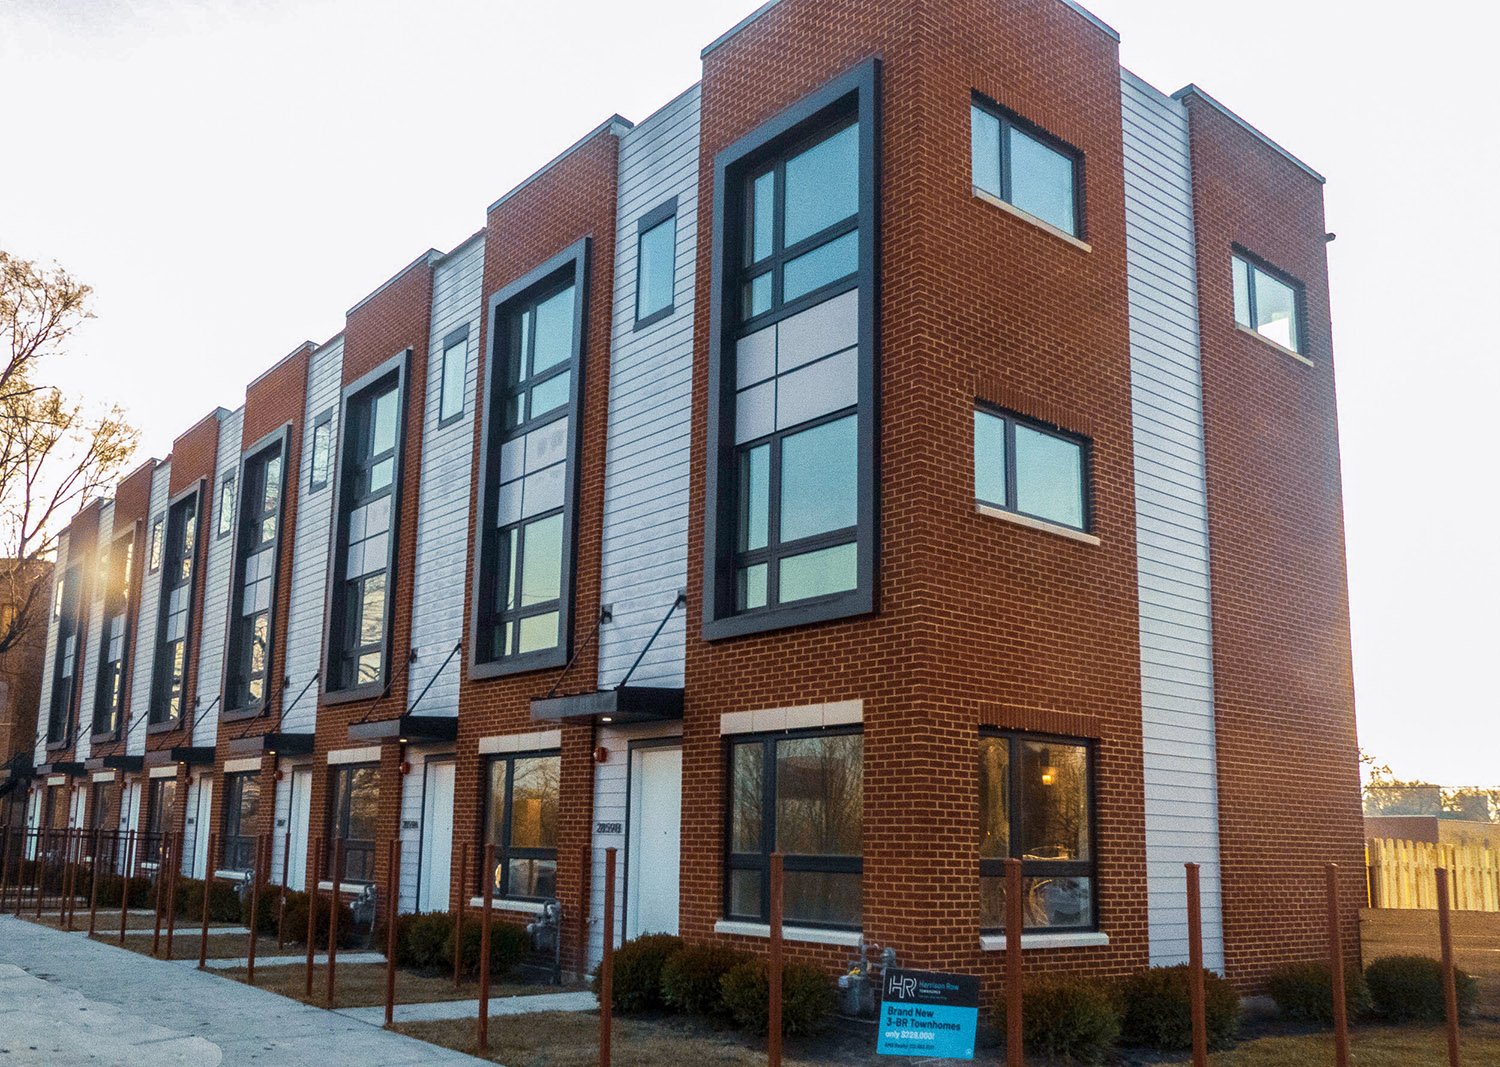 Completed Phase 1 Townhomes. Image by Structured Development